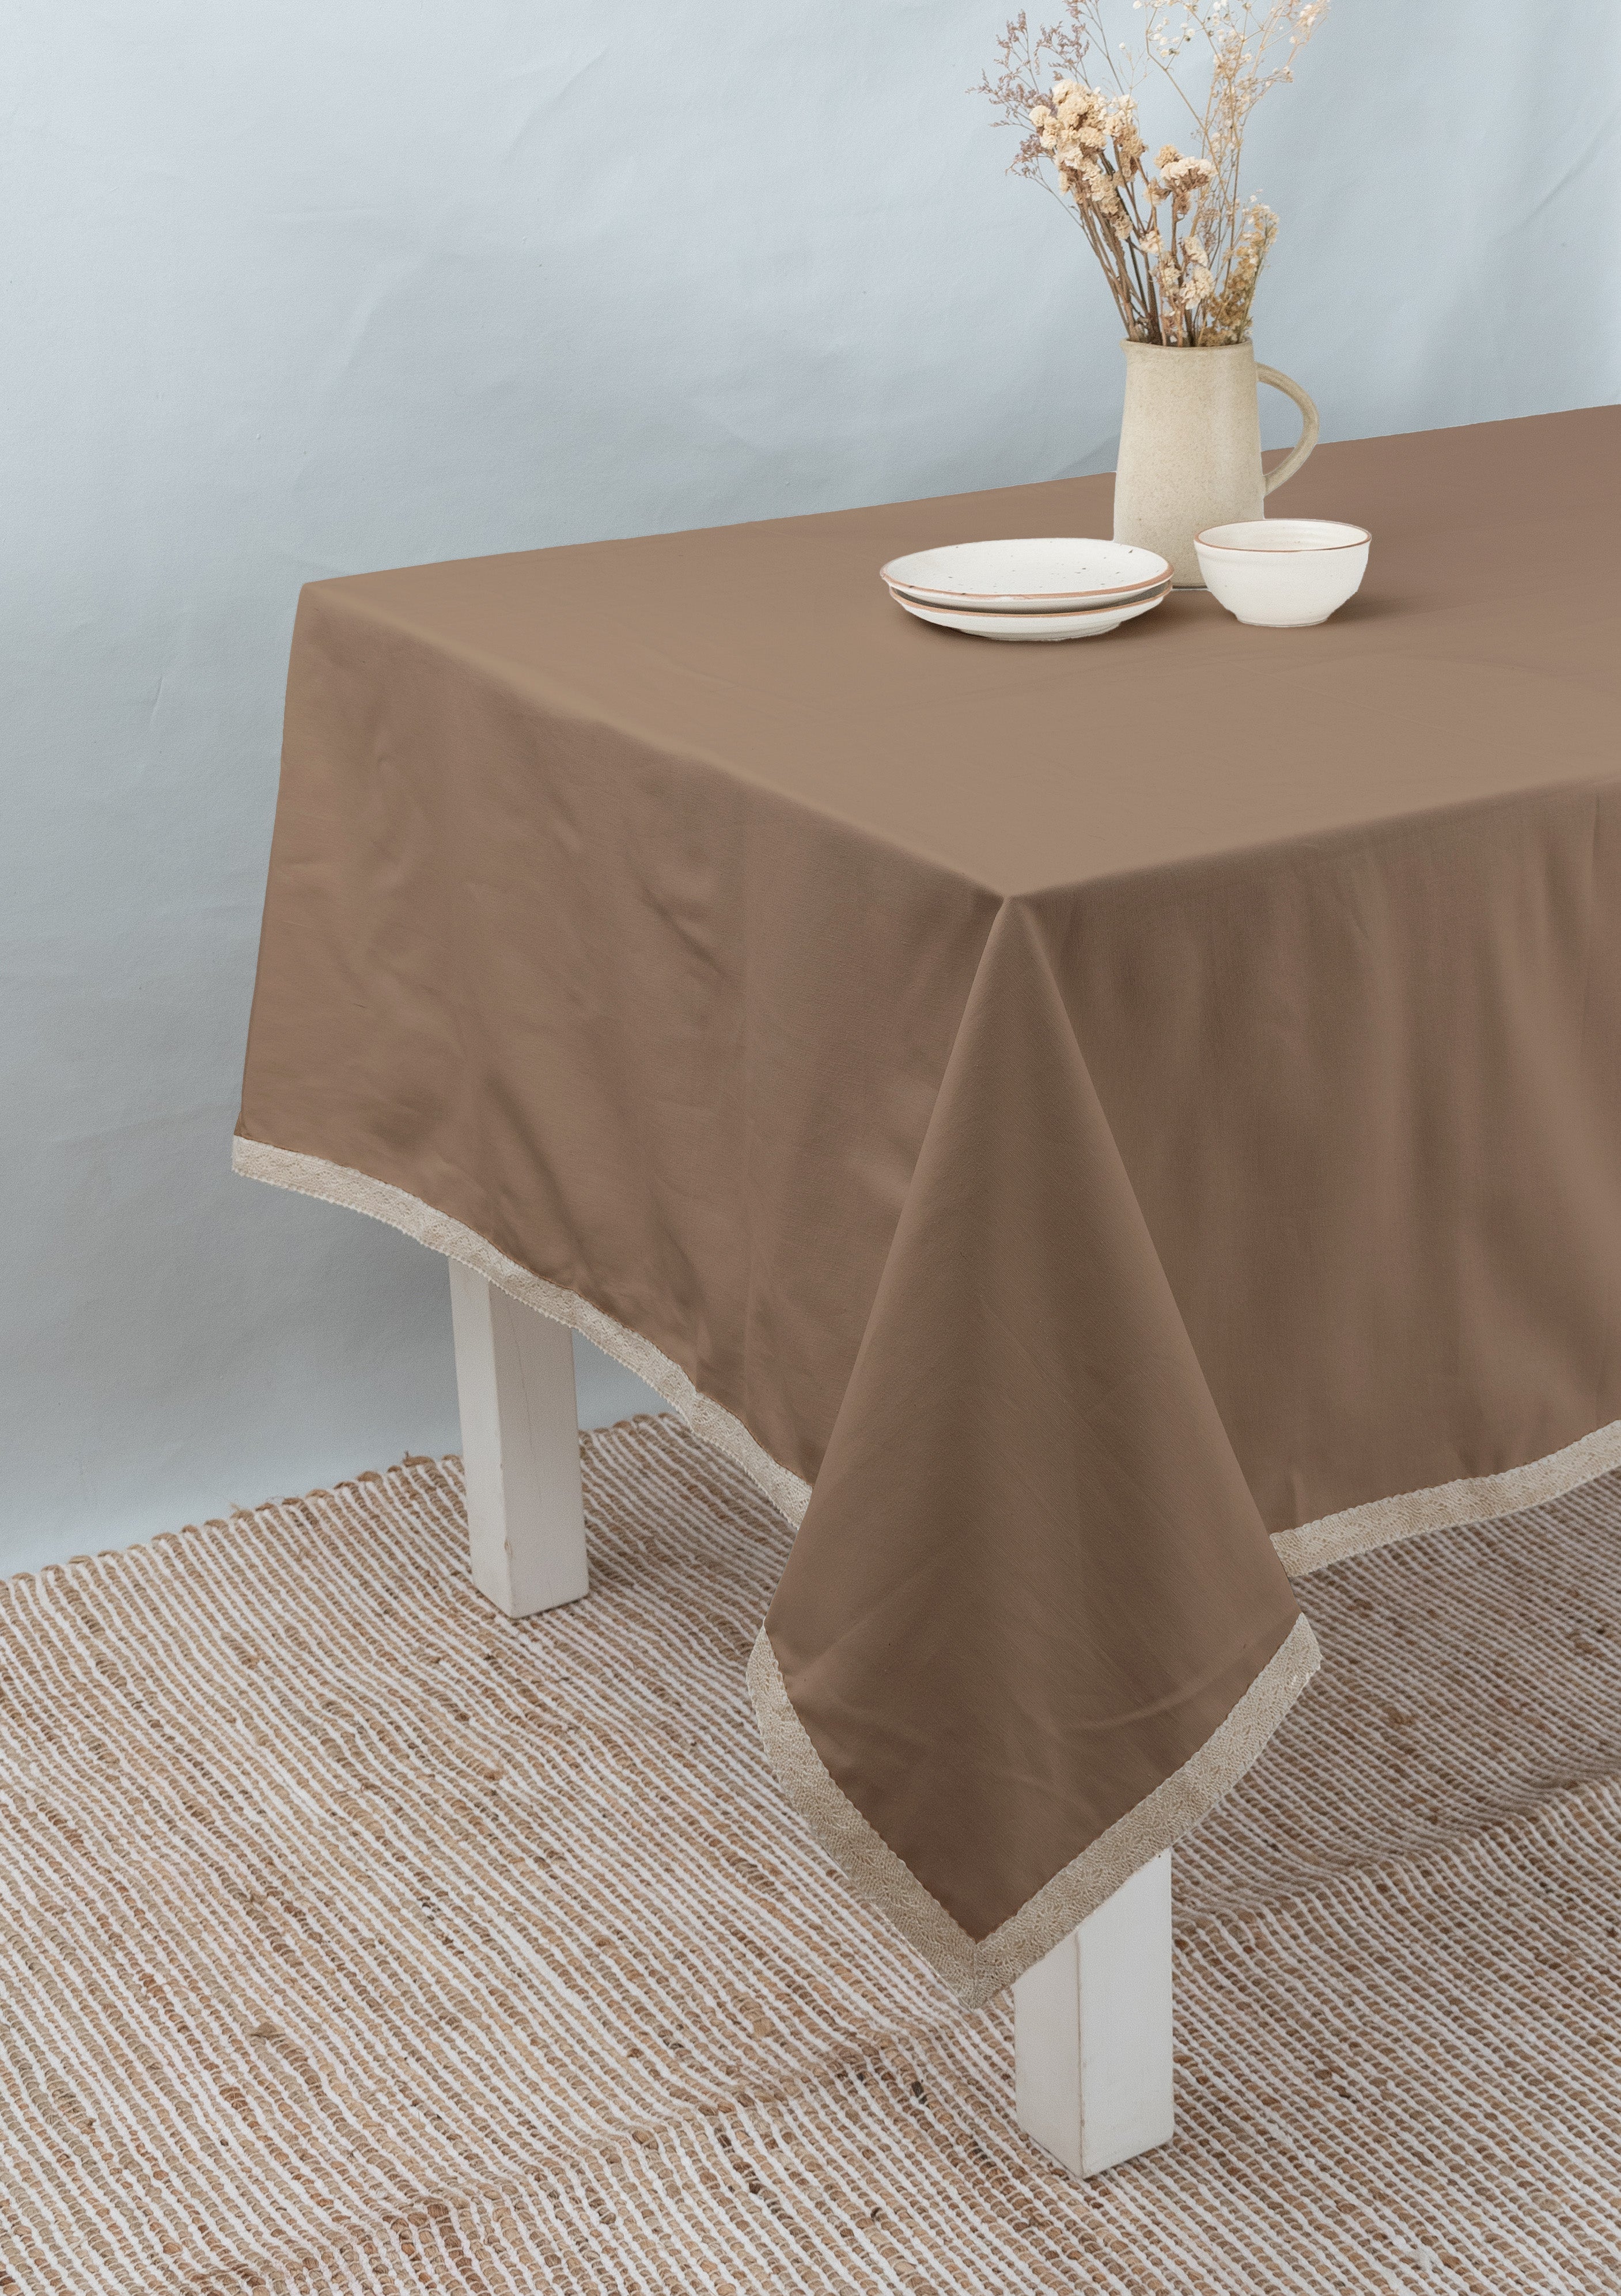 Solid chocolate brown 100% cotton plain table cloth for 4 seater or 6 seater dining  with lace border